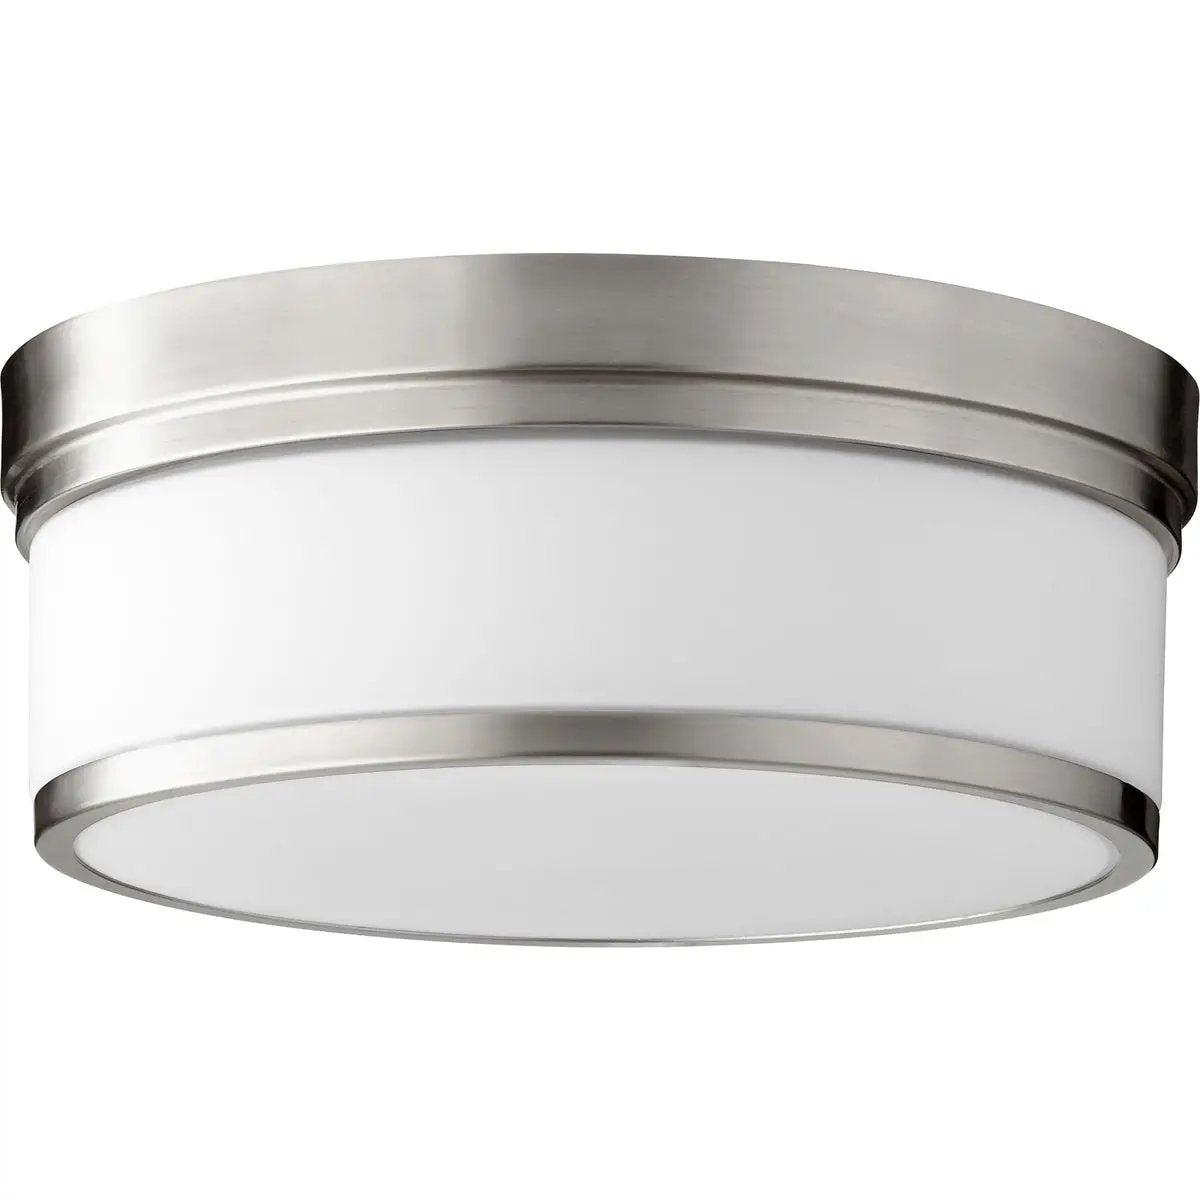 Modern Flush Mount Light with white shade, curved silver edge, and sleek design. Adds futuristic luxury to any space. 60W, 3 bulbs, dimmable. 14"W x 5.5"H. UL Listed, 2-year warranty.